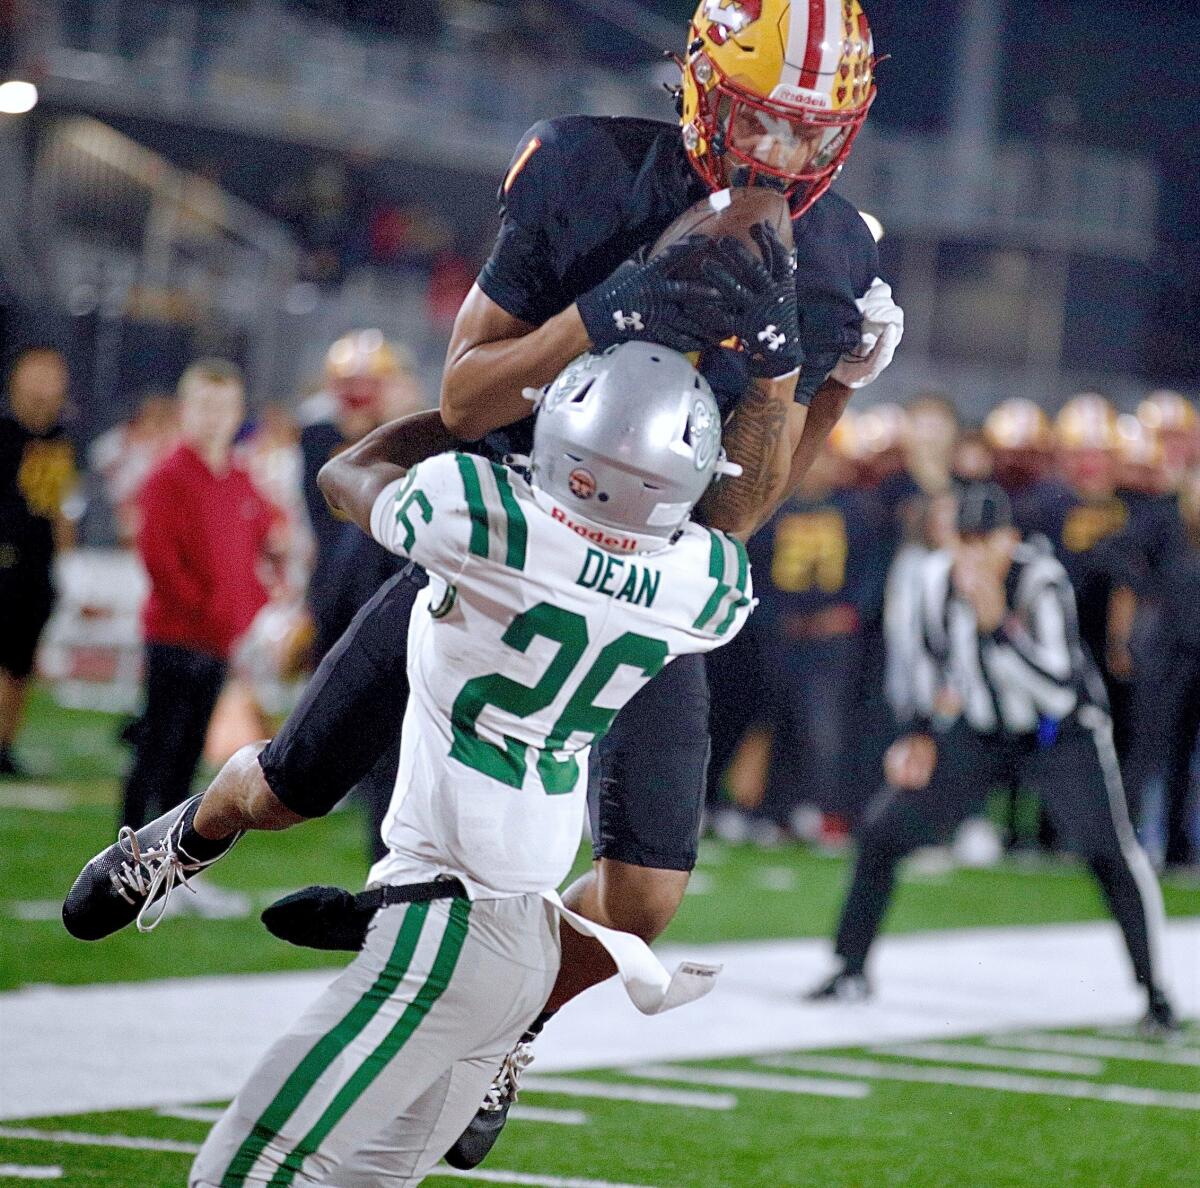 Mission Viejo wide receiver Phillip Bell catches a pass in the end zone over De La Salle defender Ant Dean.